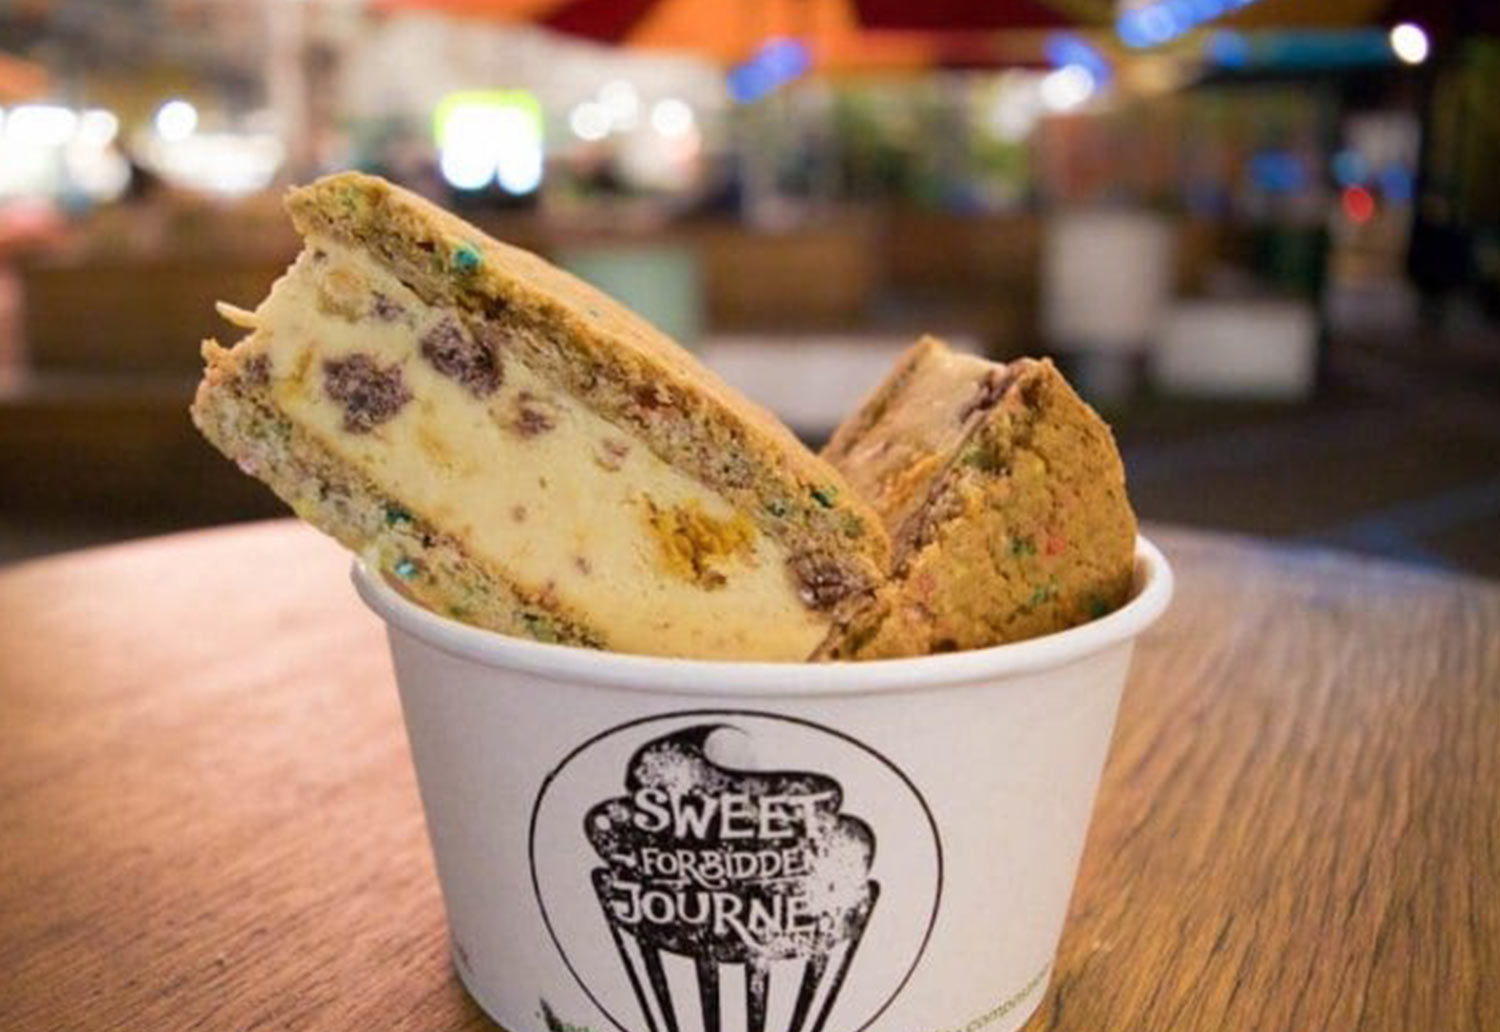 Image of cookie sandwich from Sweet Forbidden Journey